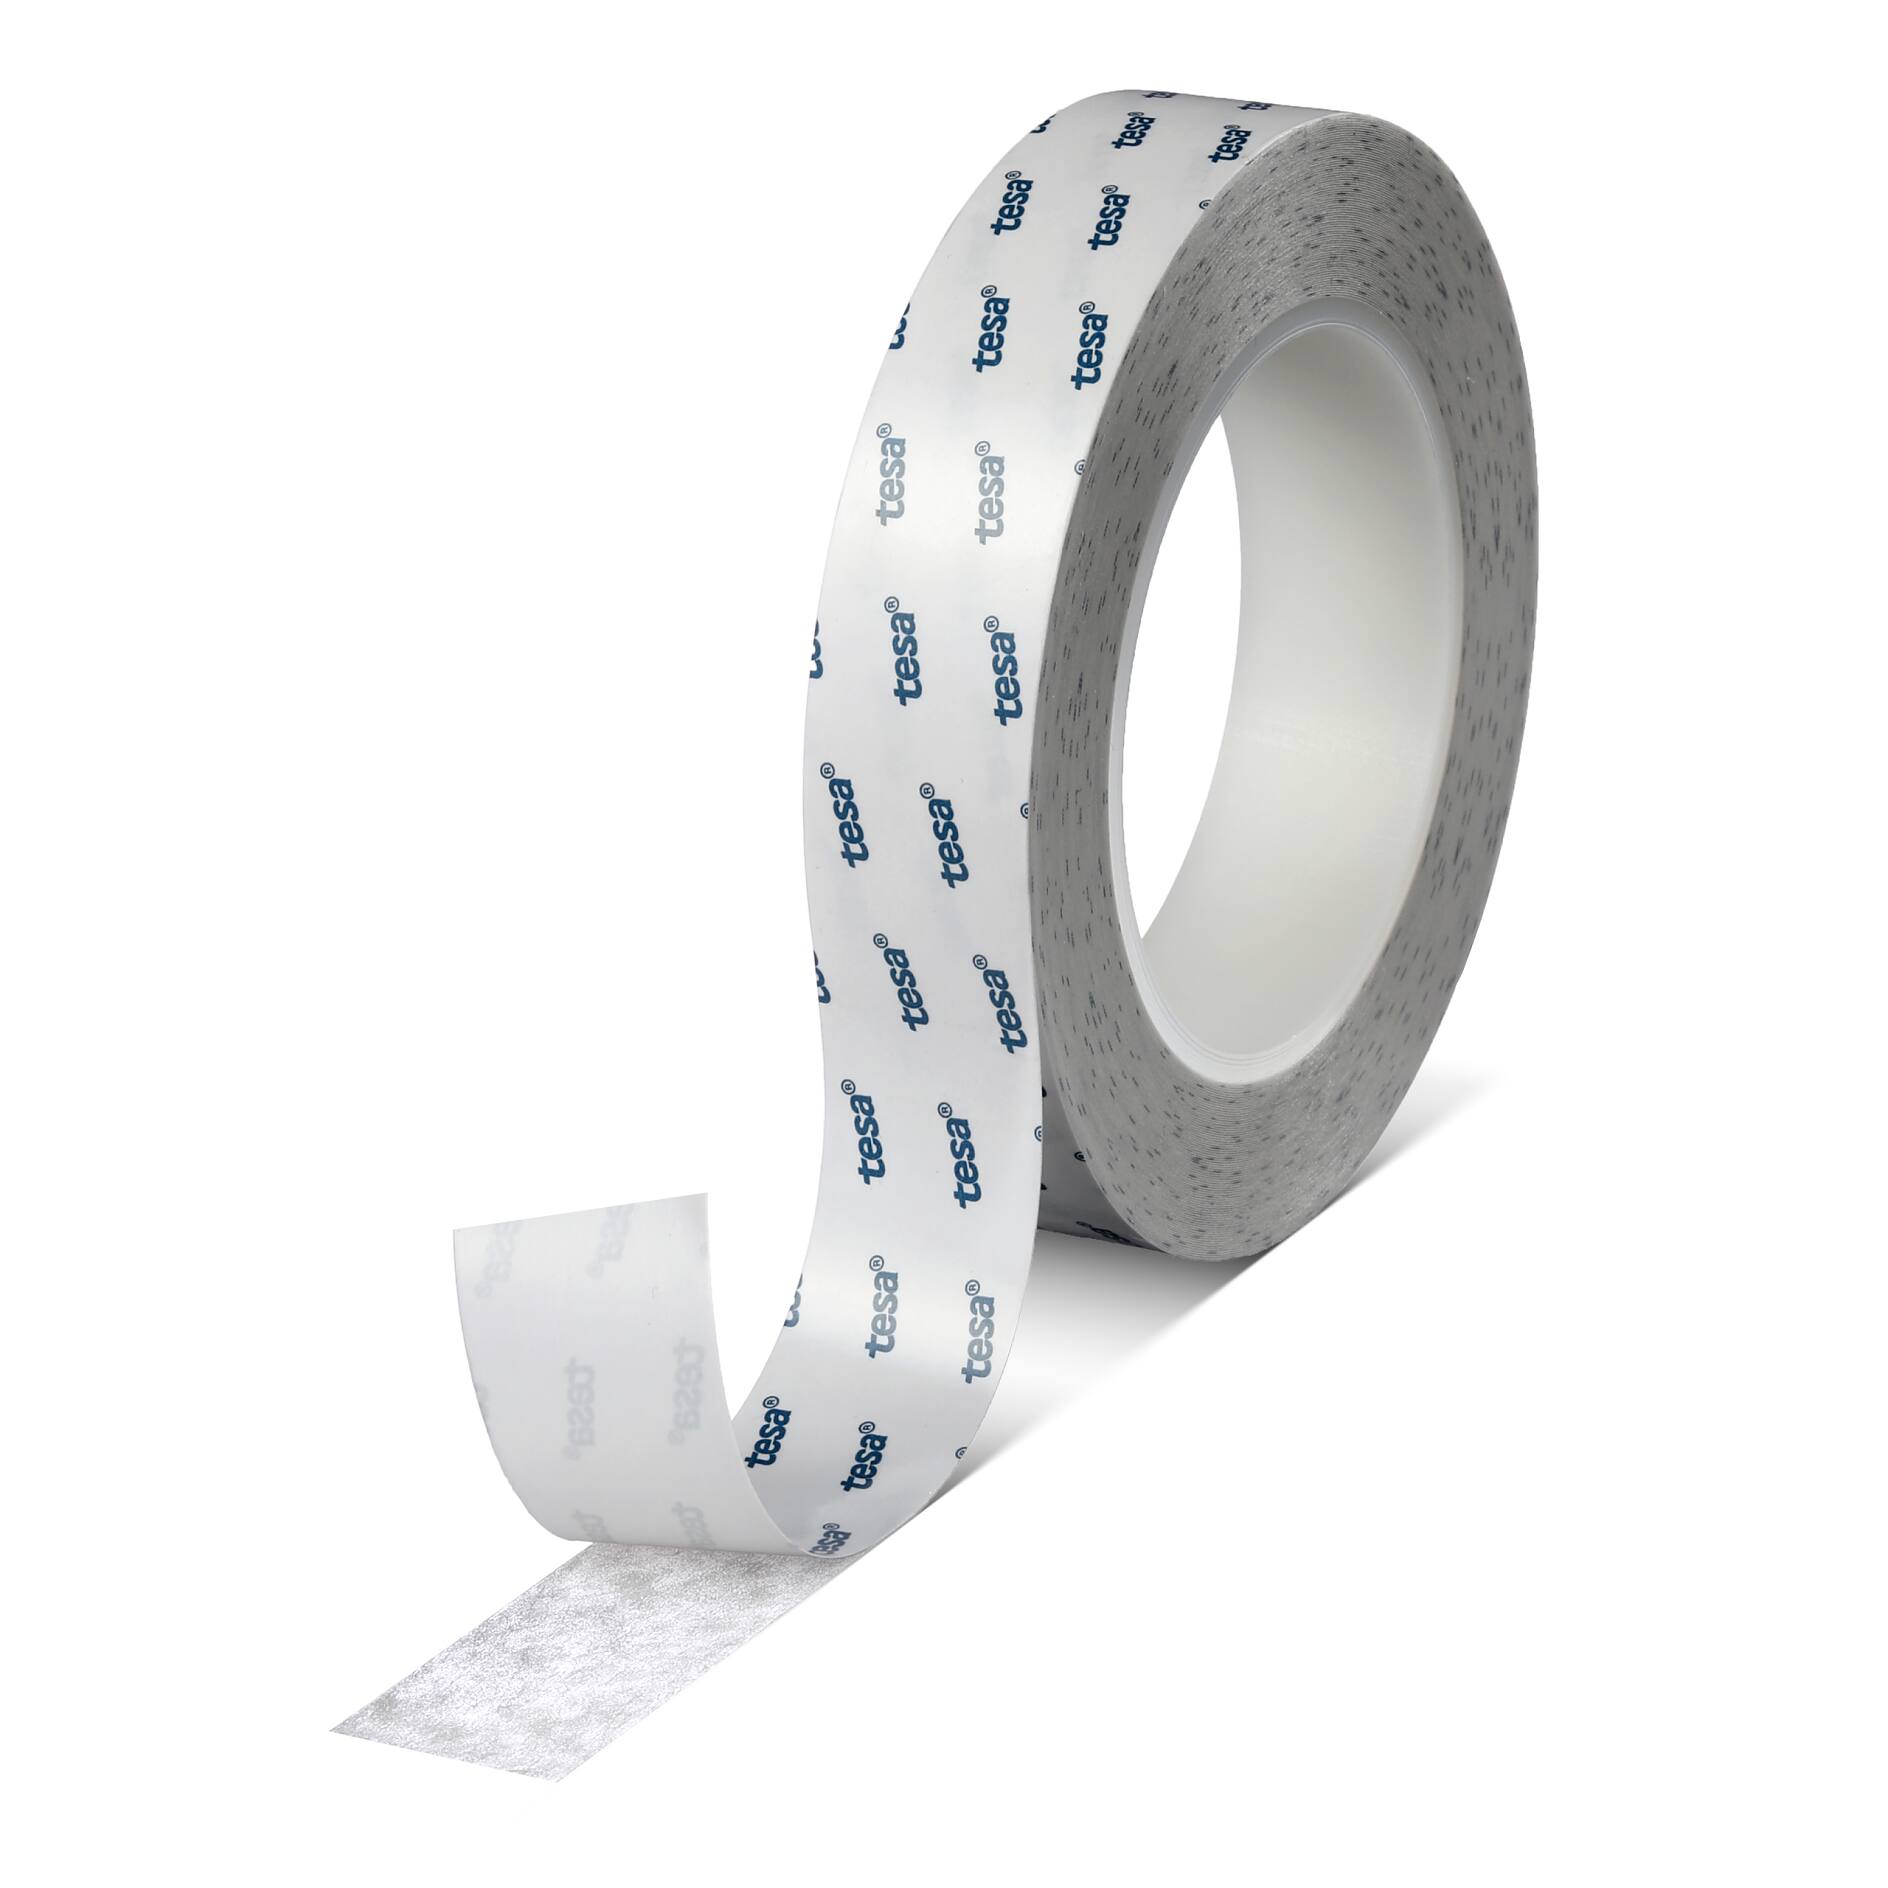 tesa® 4970 Double Sided Banner Tape – 1″ (25mm) x 60 yd - Chemical Concepts